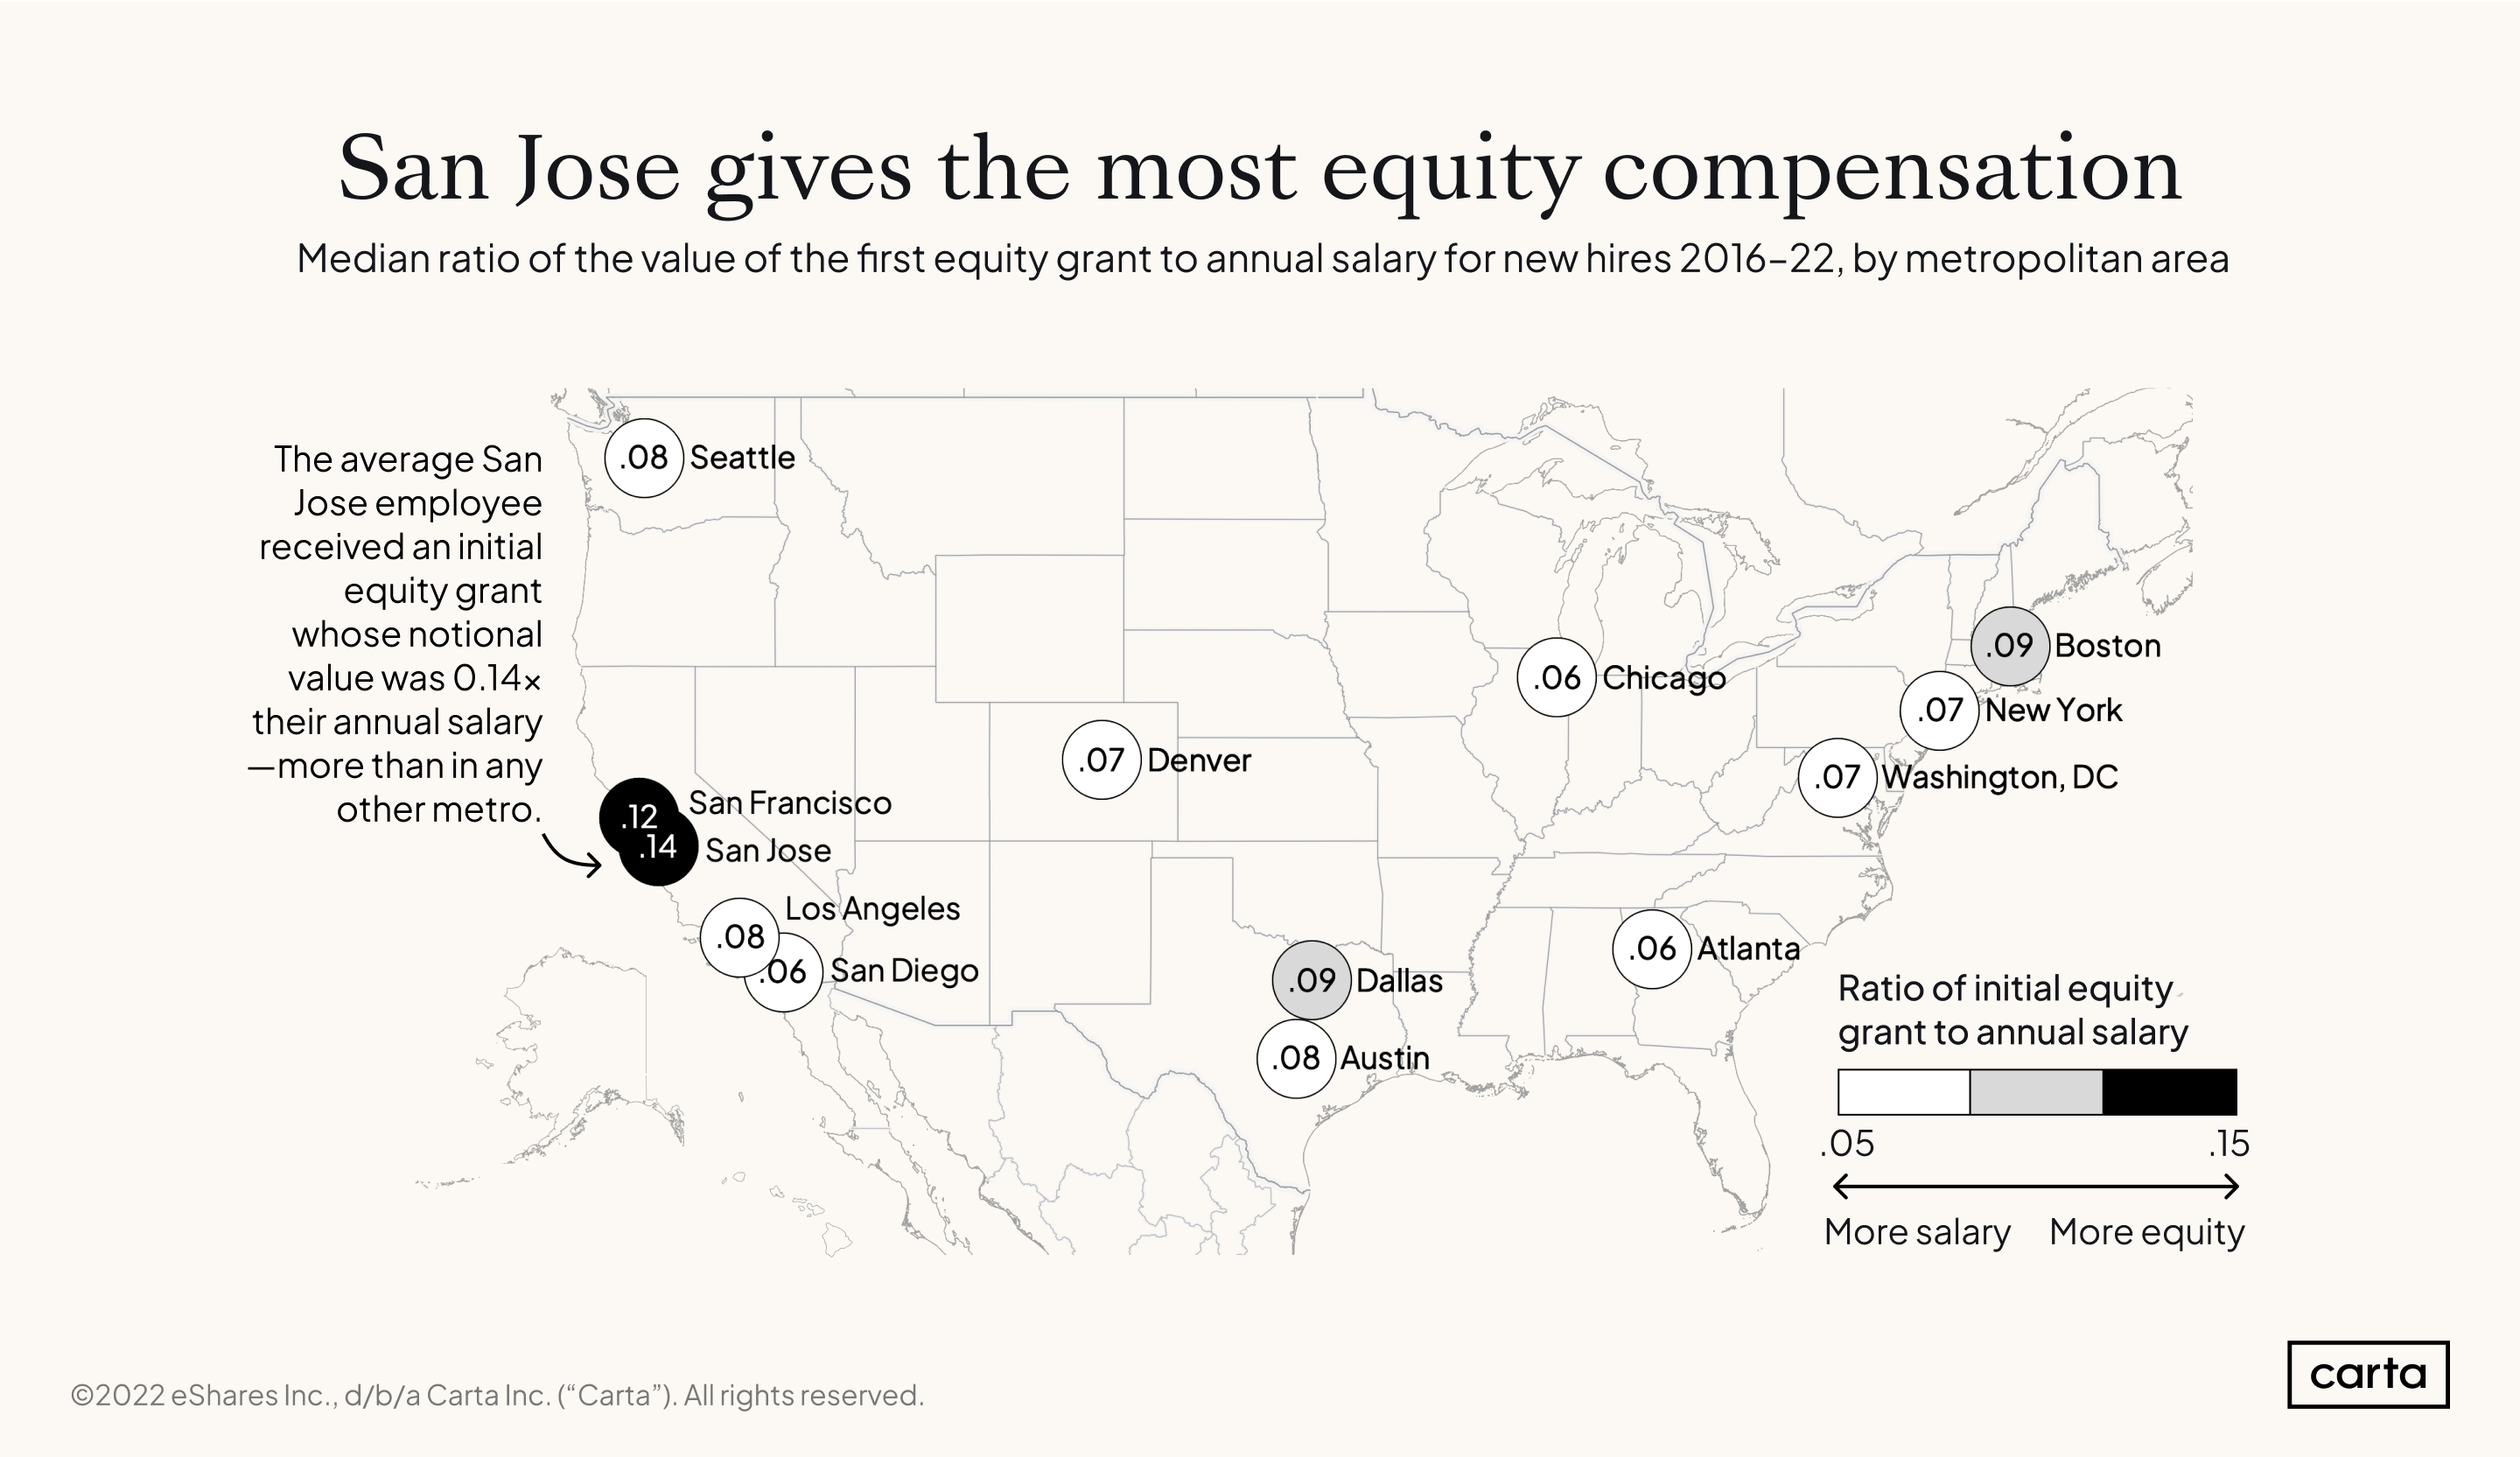 CES Equity ratio by geography